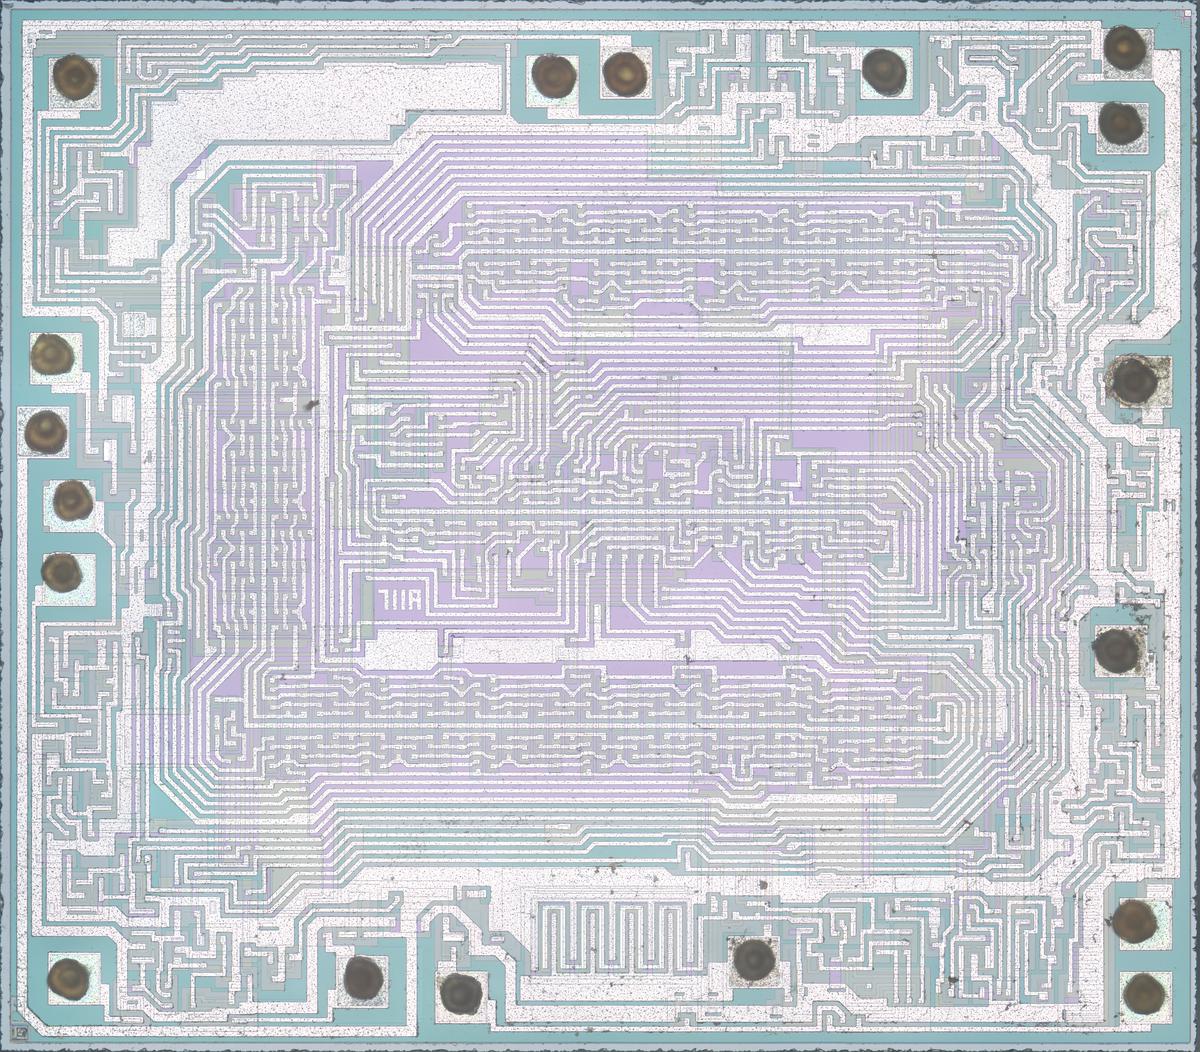 The logic chip. Photo from siliconPr0n, (CC BY 4.0).